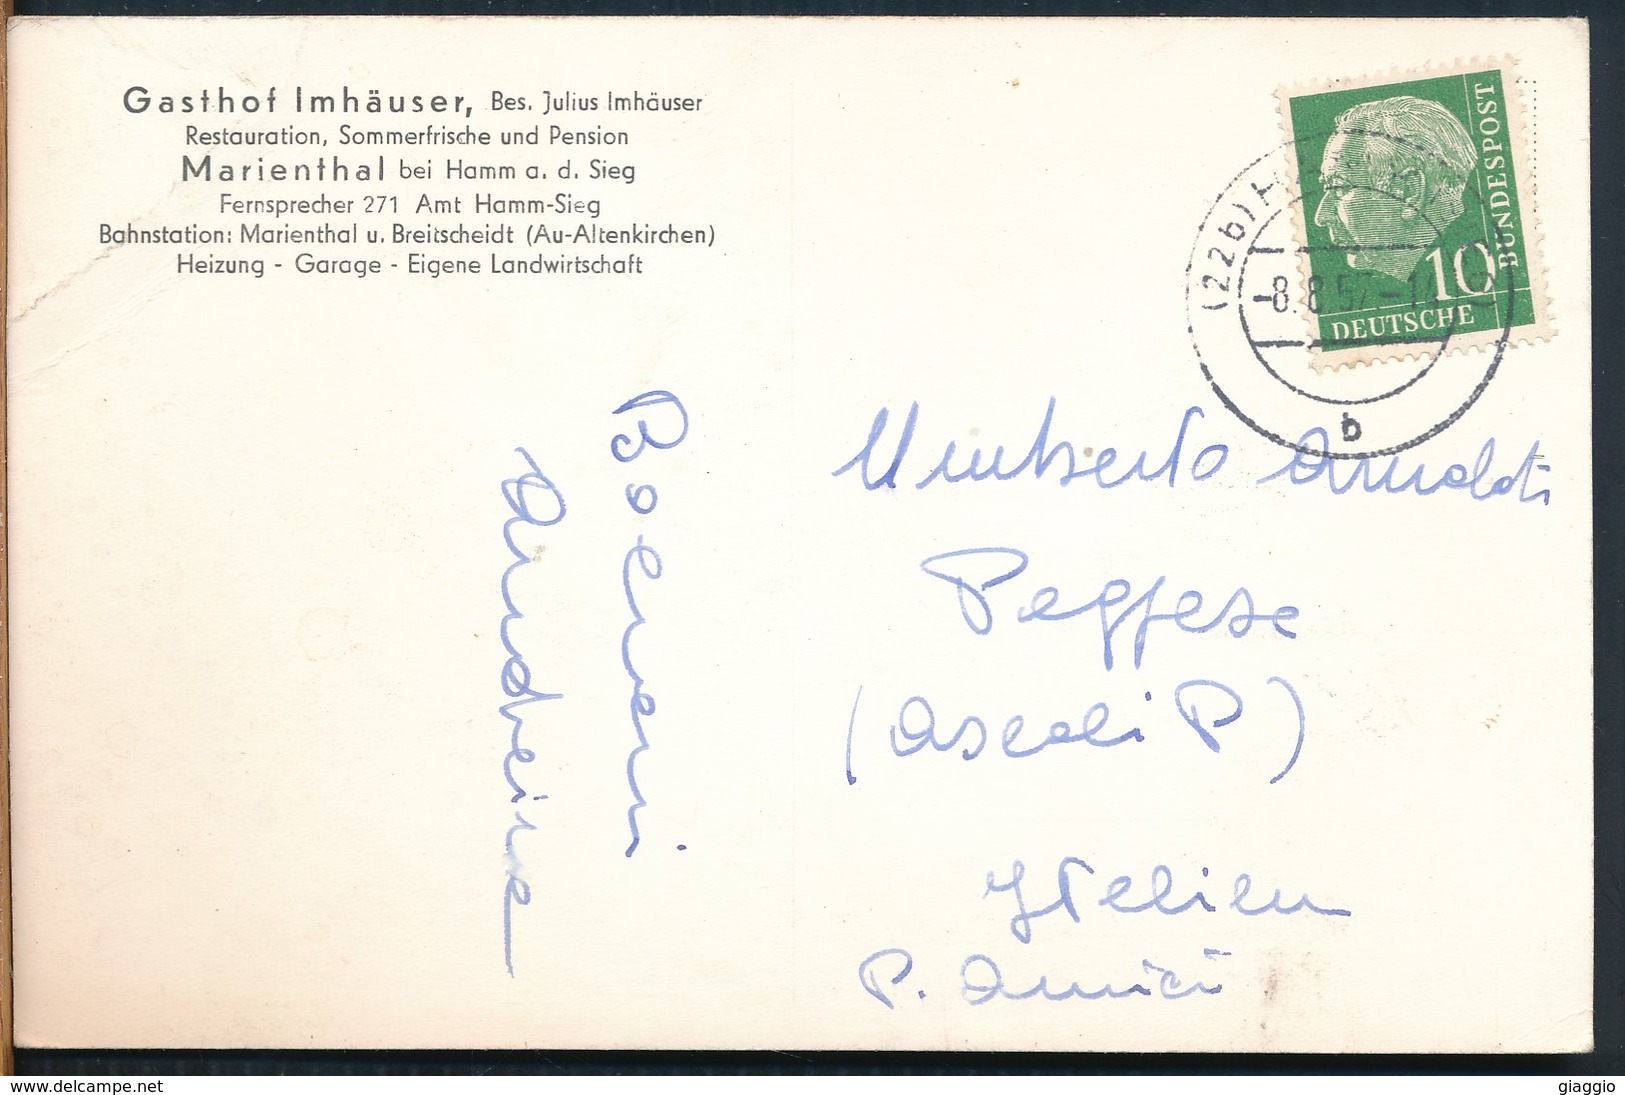 °°° 17292 - GERMANY - MARIENTHAL BEI HAMM A.D. SIEG - 1957 With Stamps °°° - Hamm